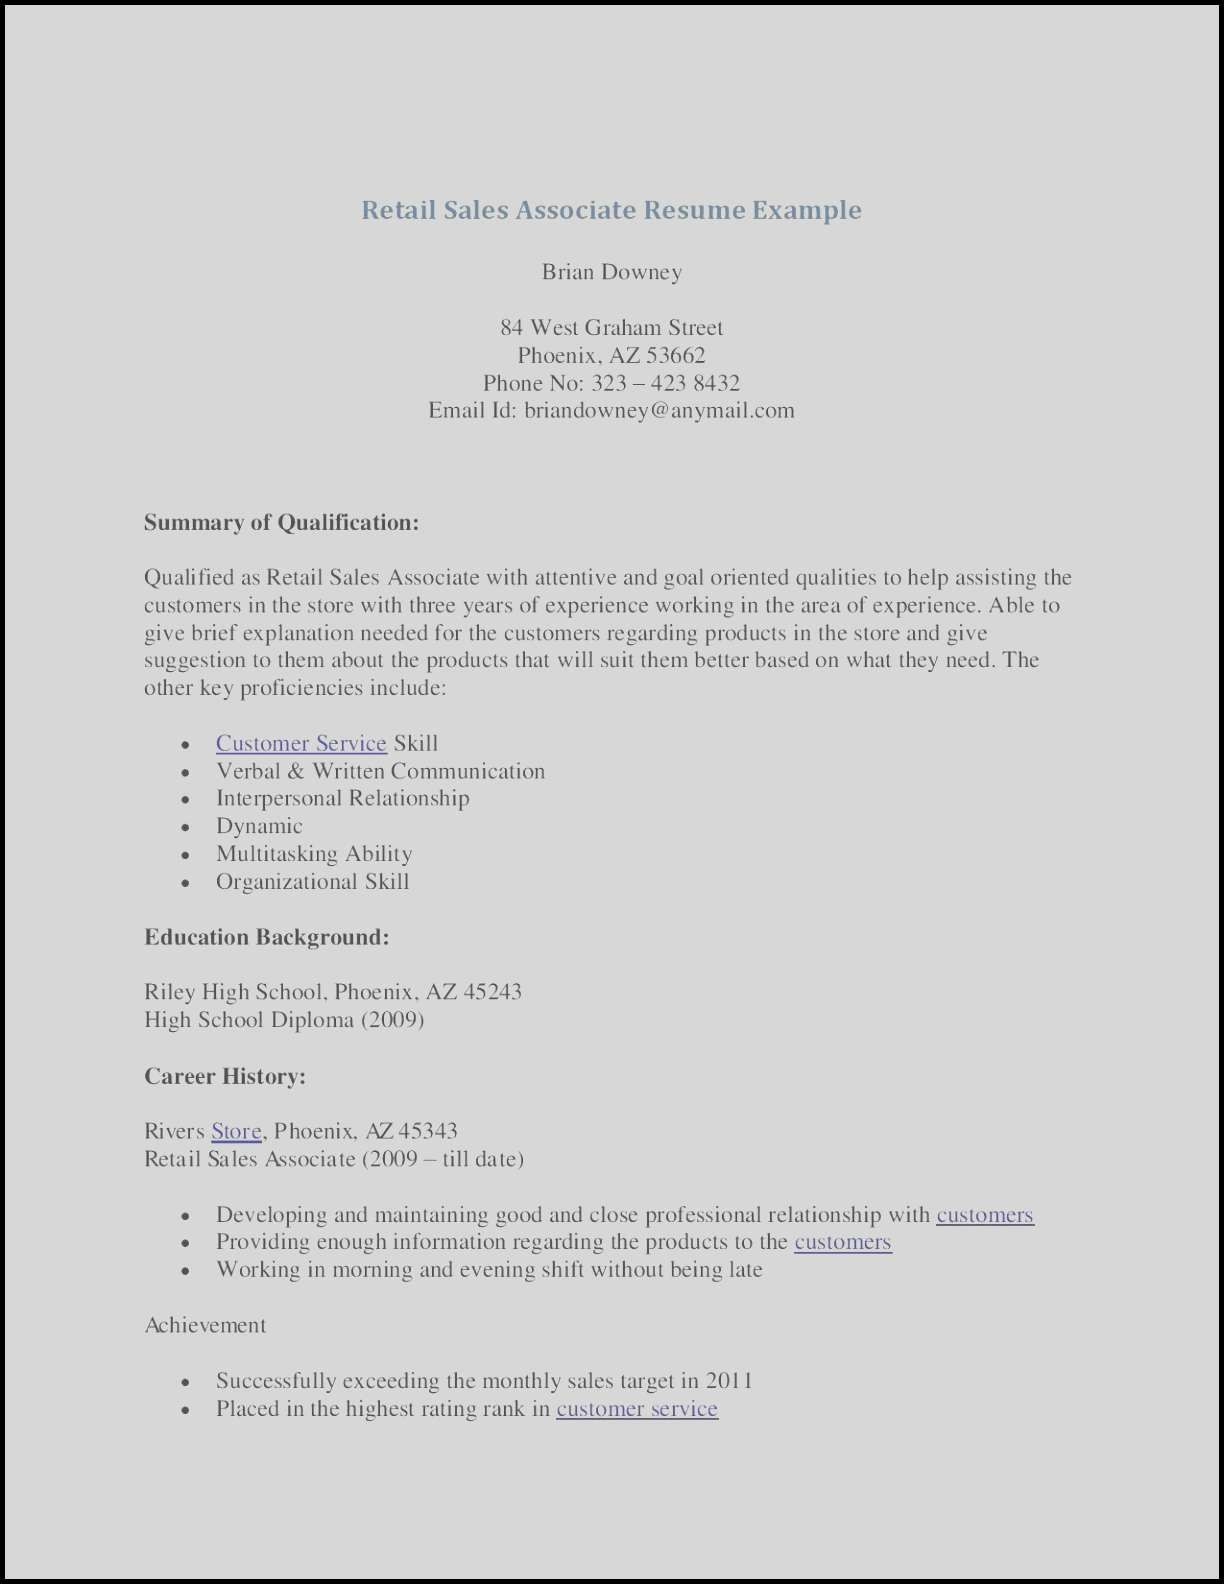 Sample Resume for Sales Clerk without Experience 80 Awesome Photos Of Sample Resume for Sales Clerk without Experience